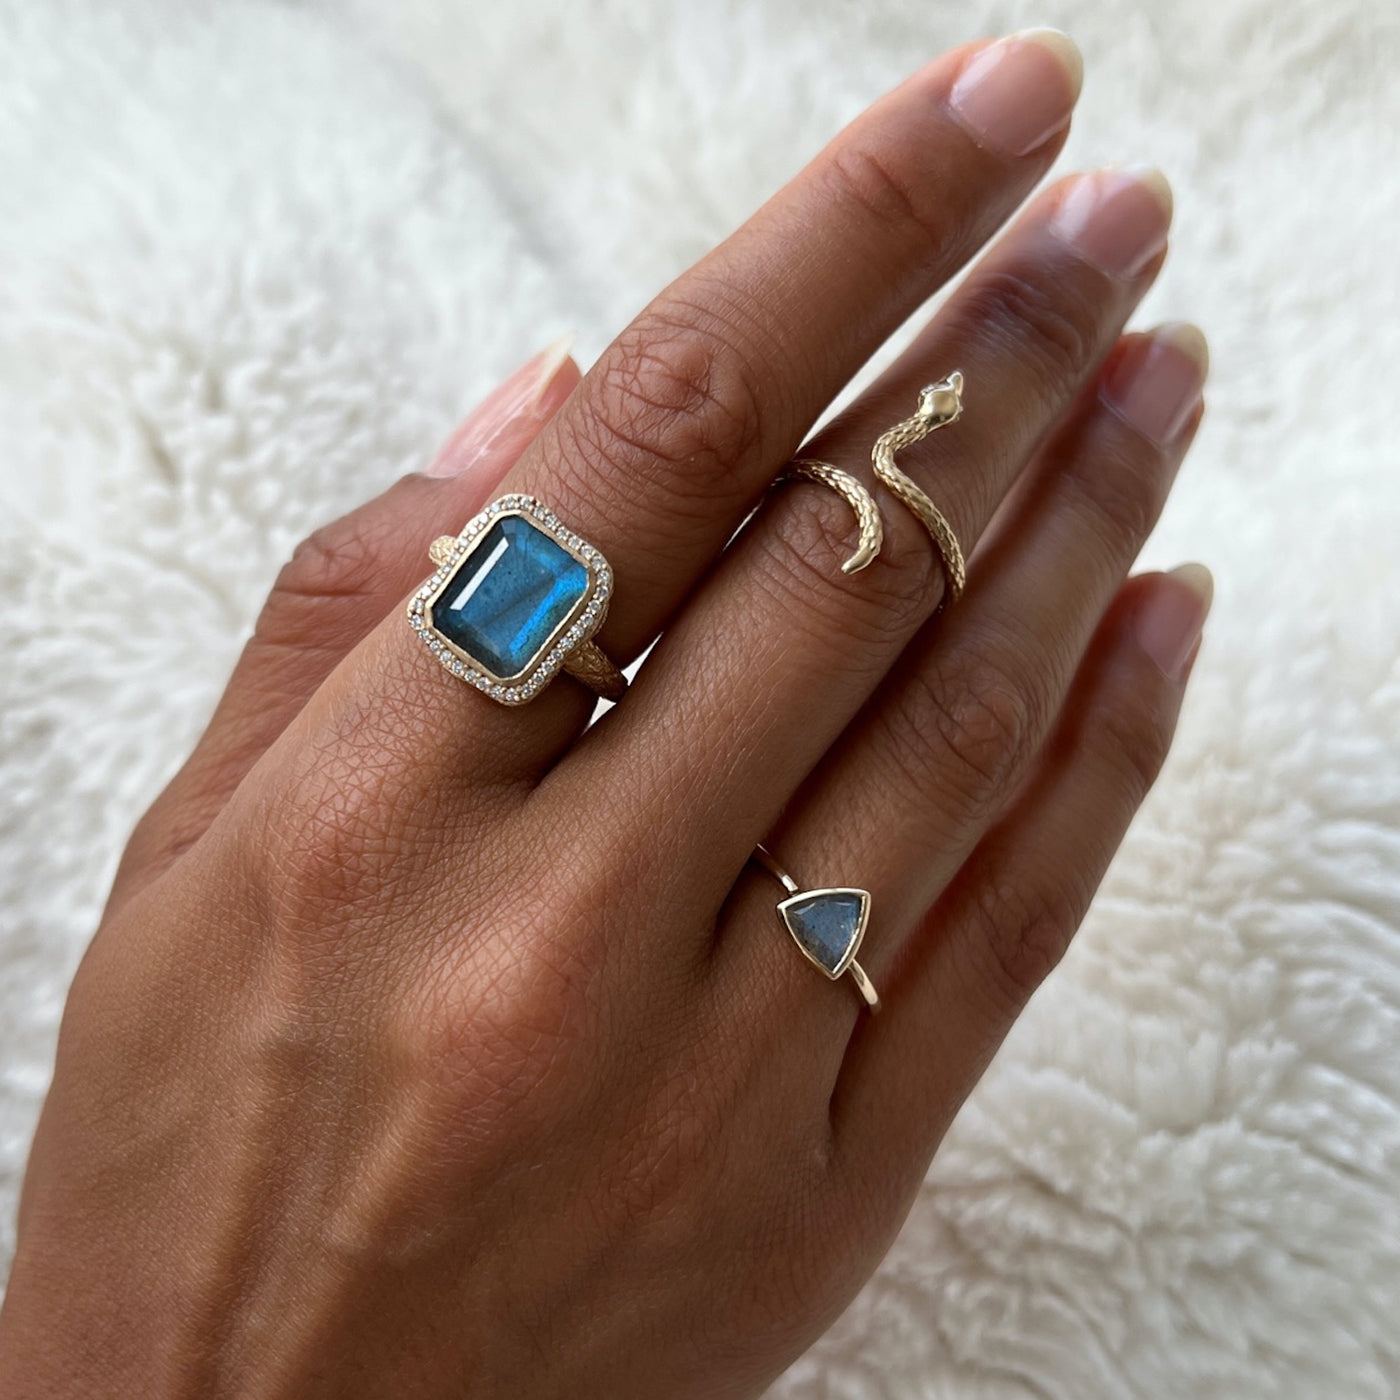 Hand model wearing three yellow gold rings. First ring is a emerald cut labradorite stone, second is a textured snake ring & the third ring is a trillion cut labradorite.